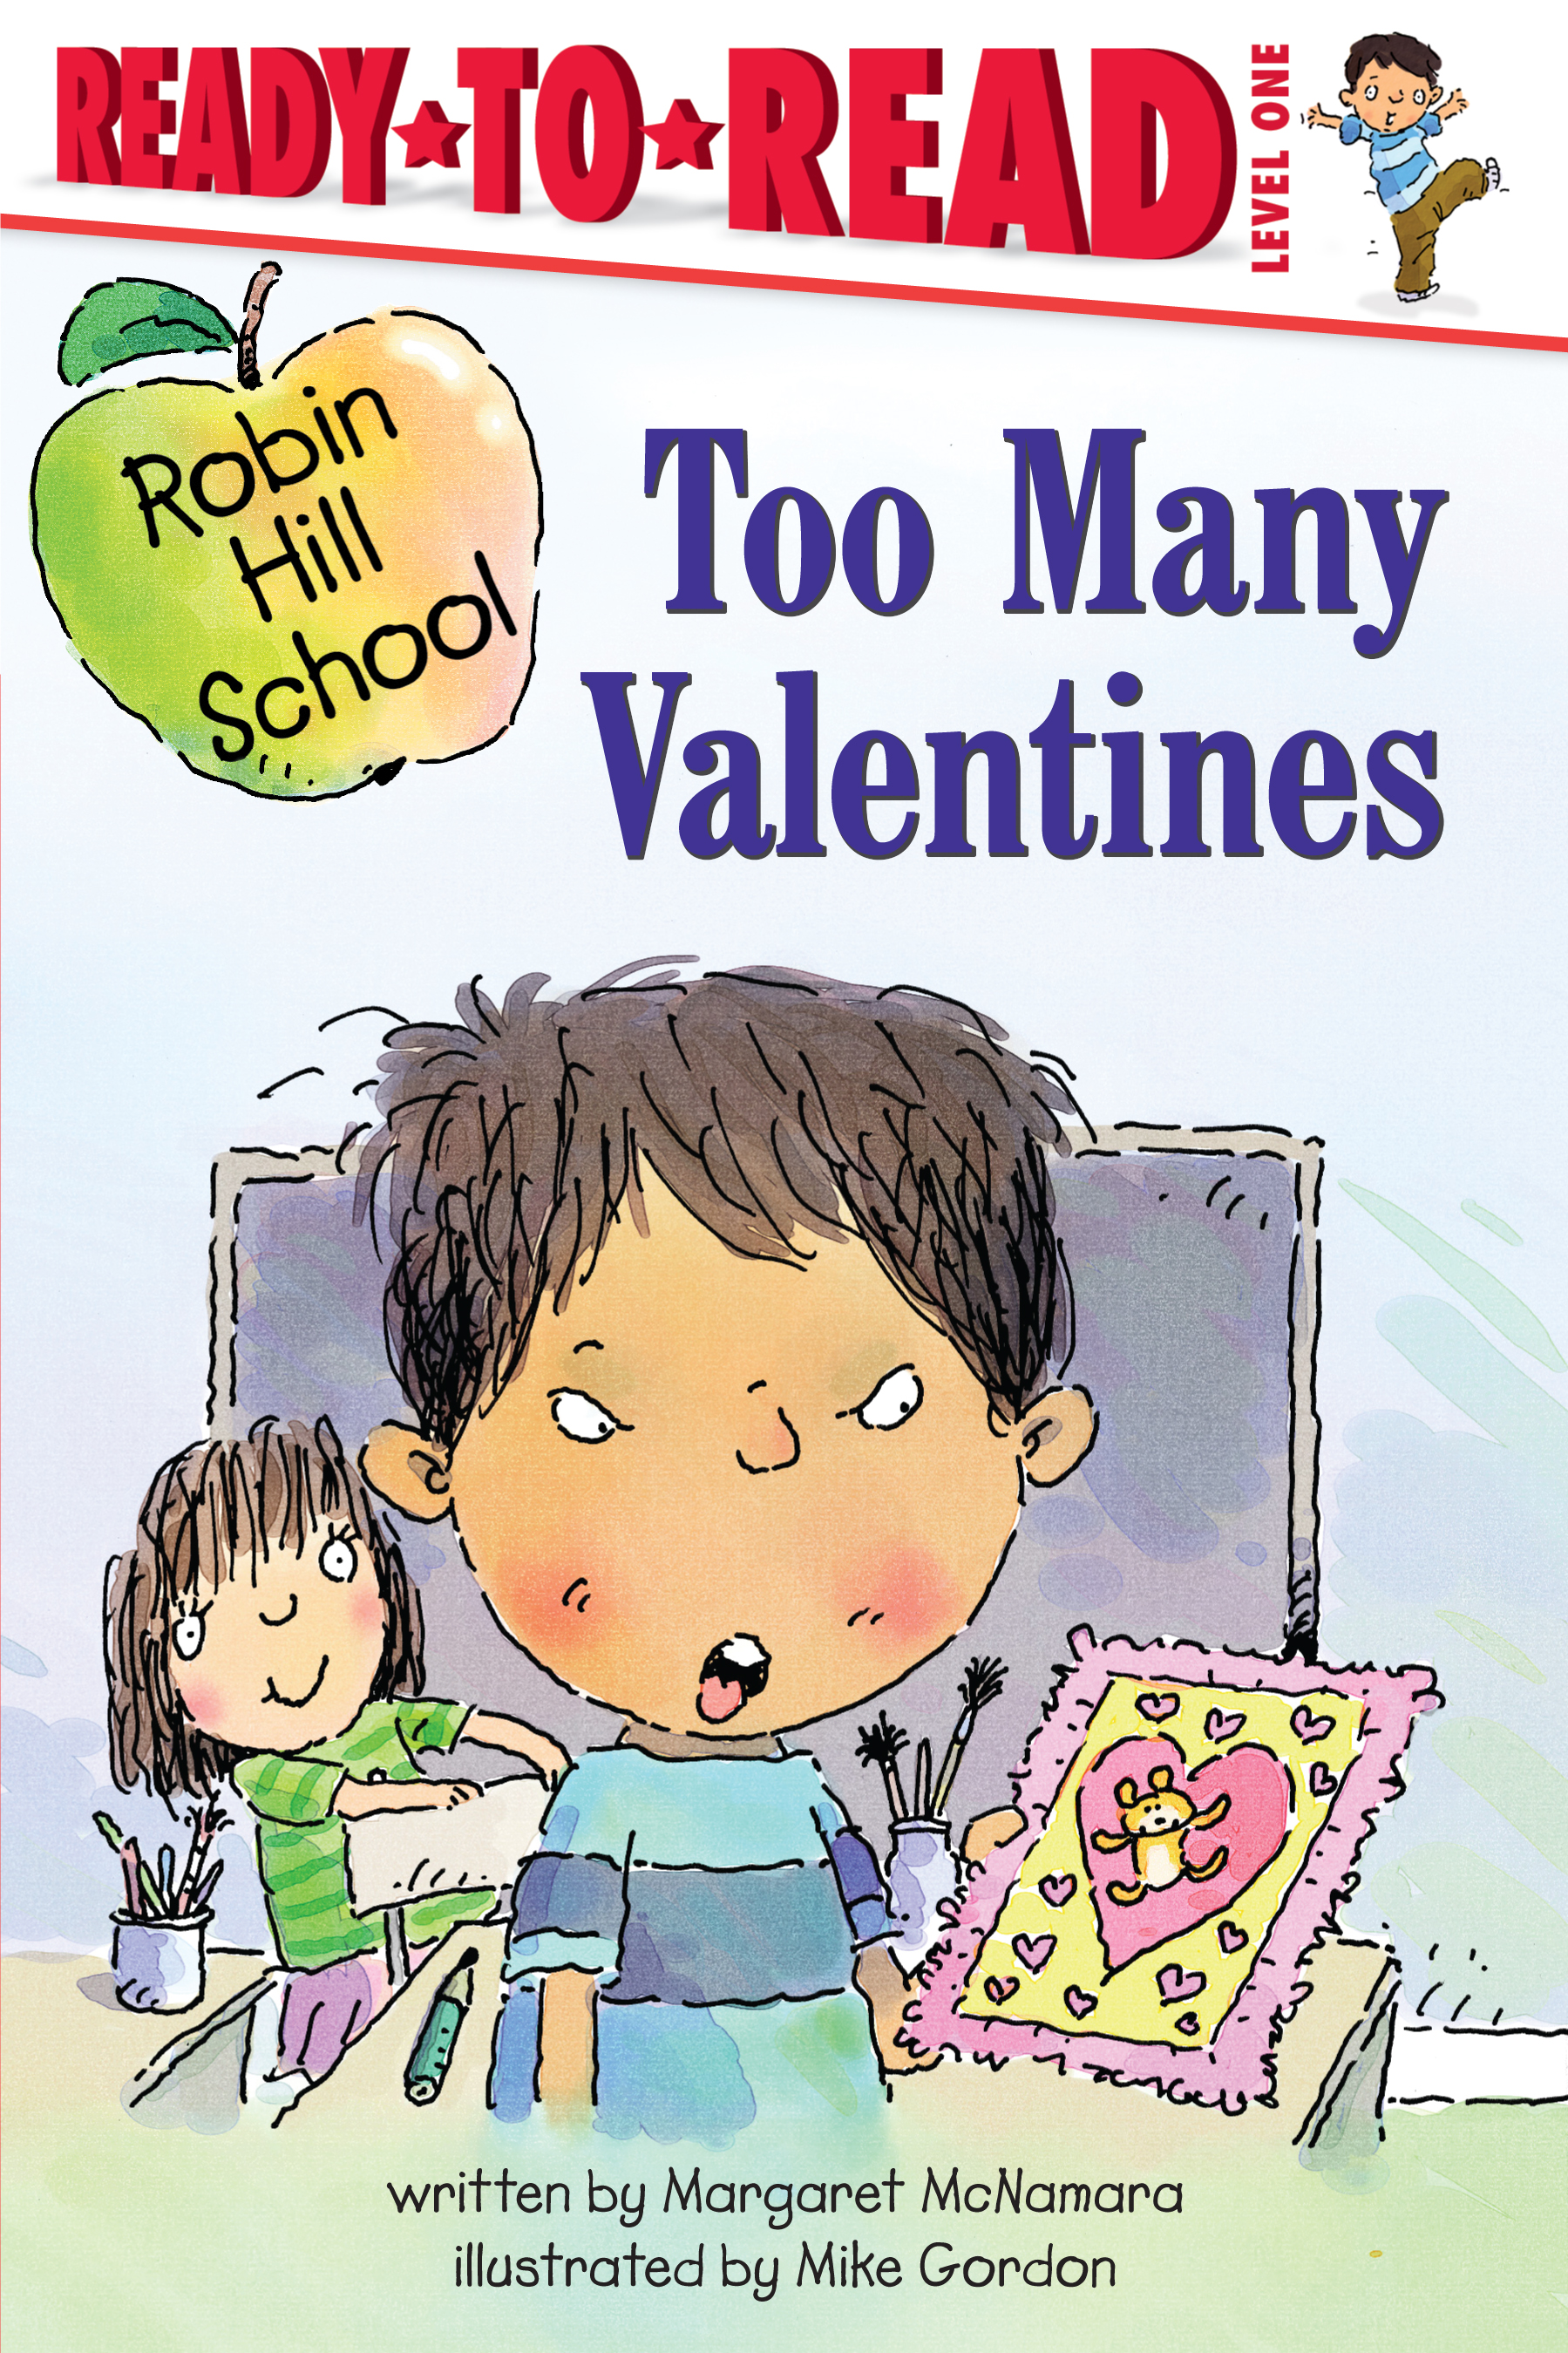 photo of the book "too many valentines"